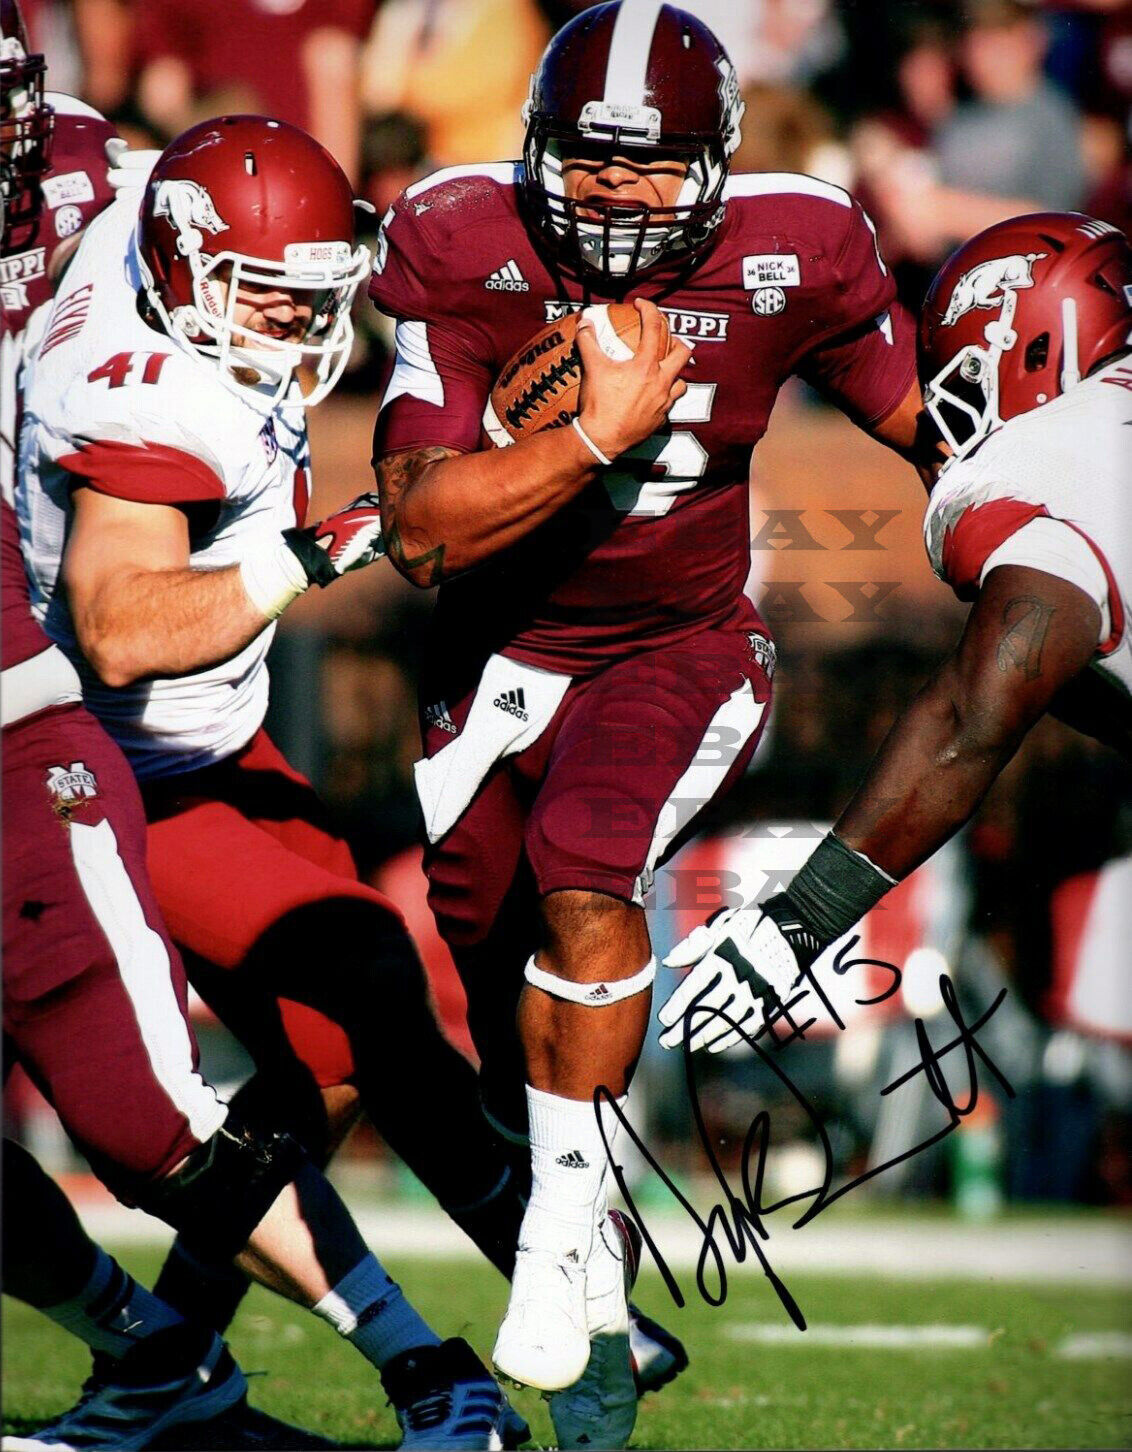 DAK PRESCOTT MISSISSIPPI STATE BULLDOGS Signed 8x10 autographed Photo Poster painting Reprint